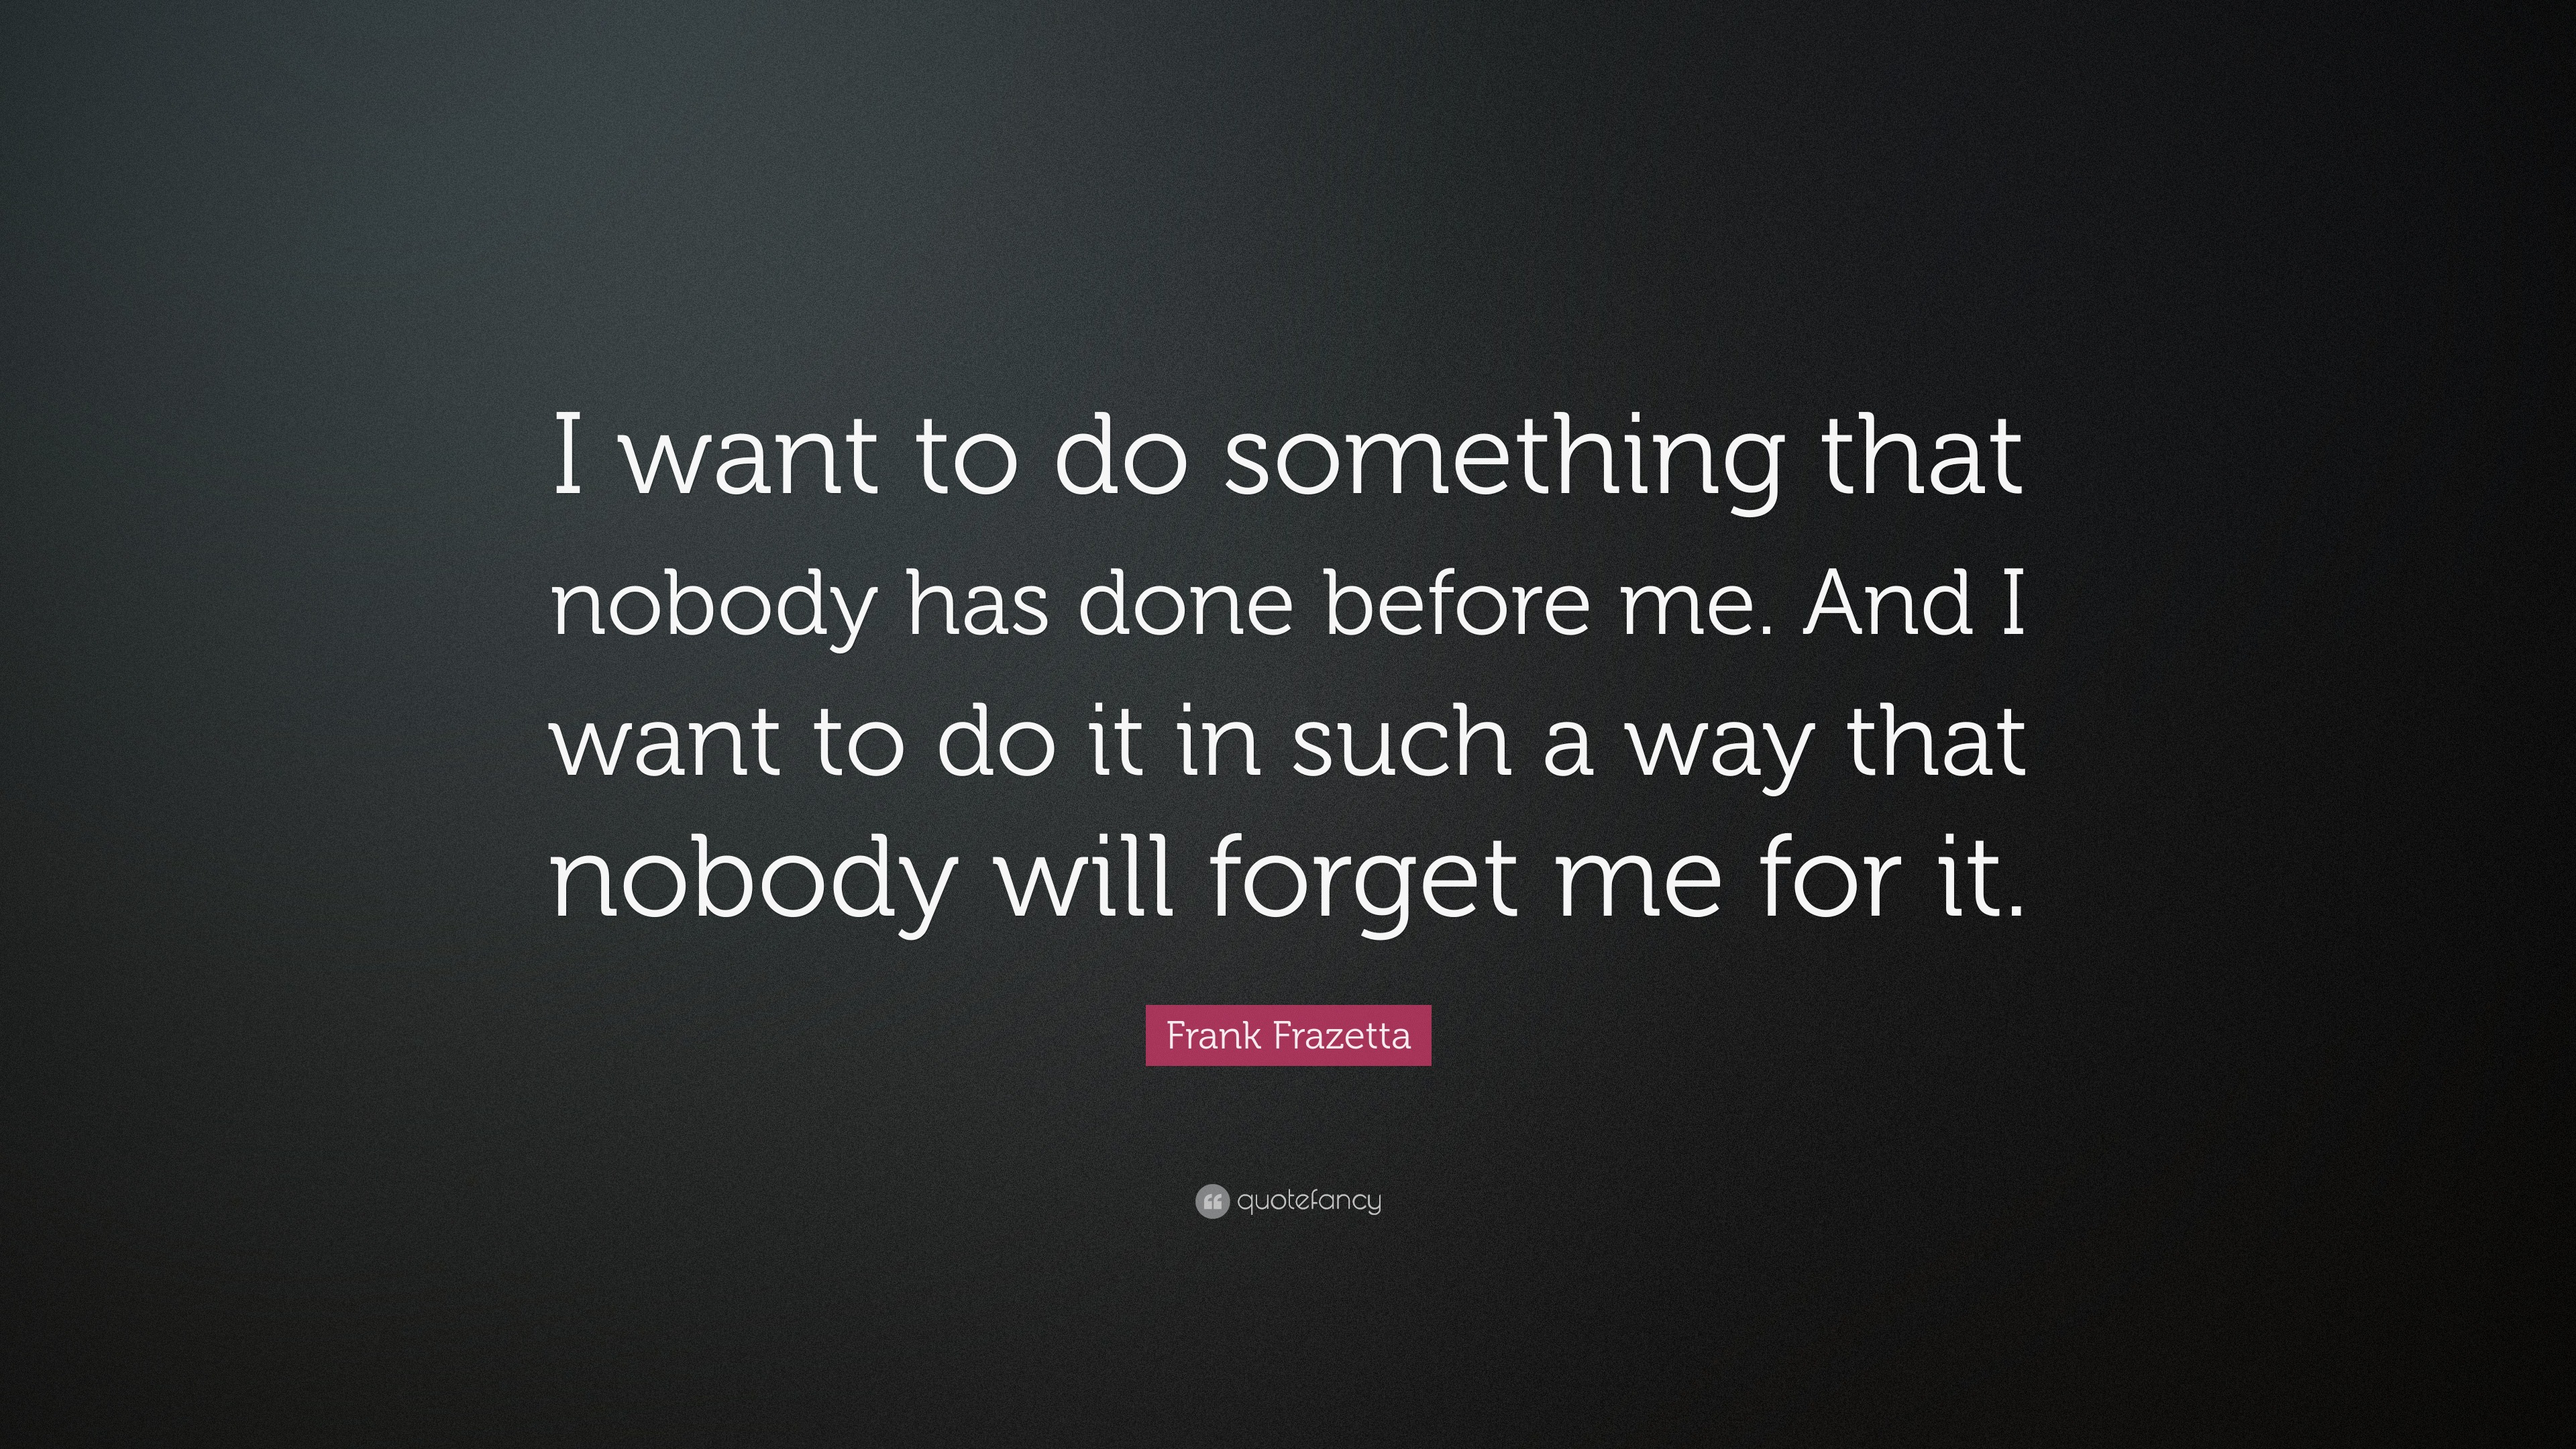 Frank Frazetta Quote: “I want to do something that nobody has done ...